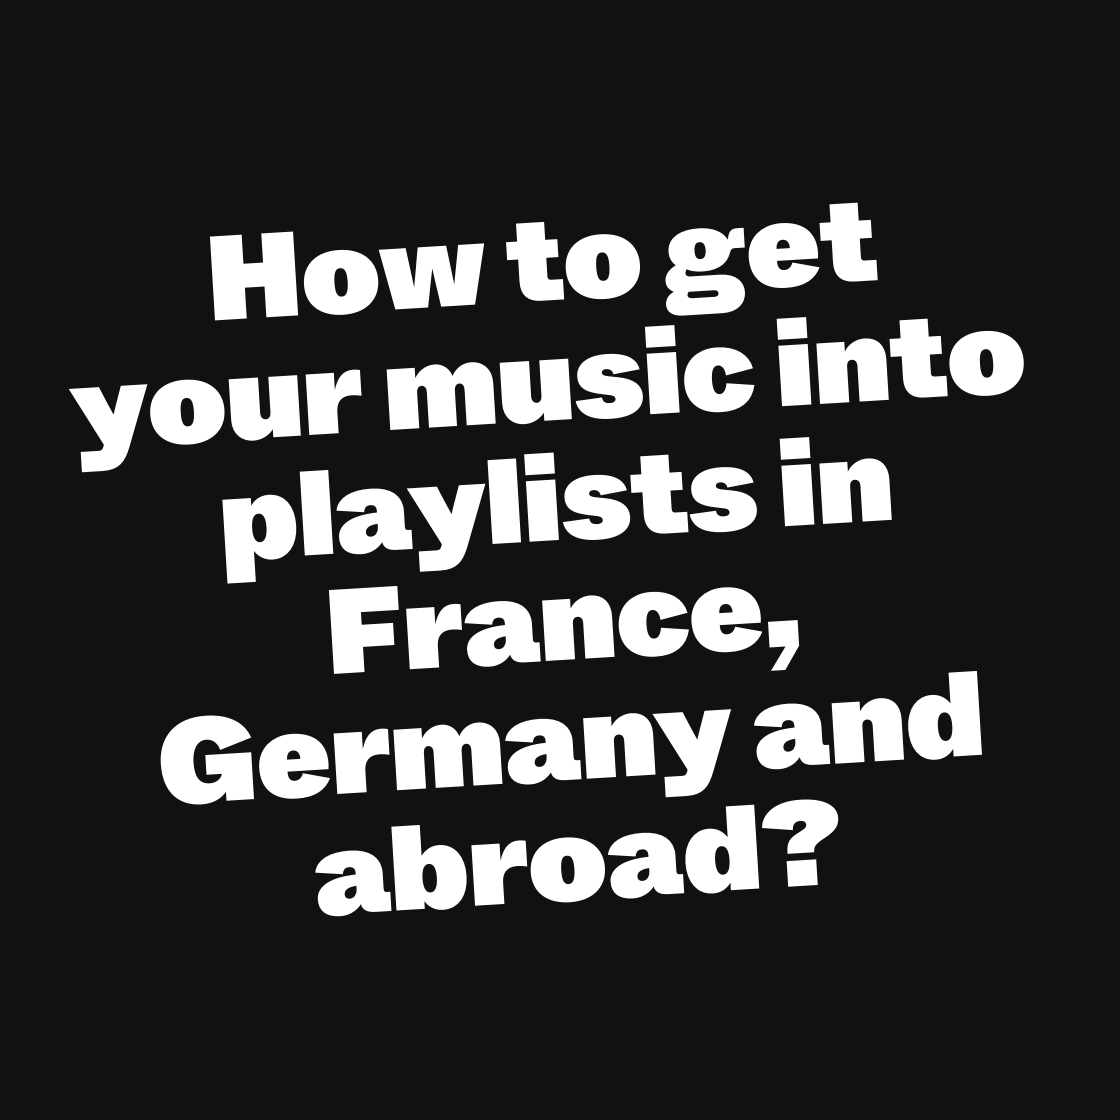 How to get your music into playlists?